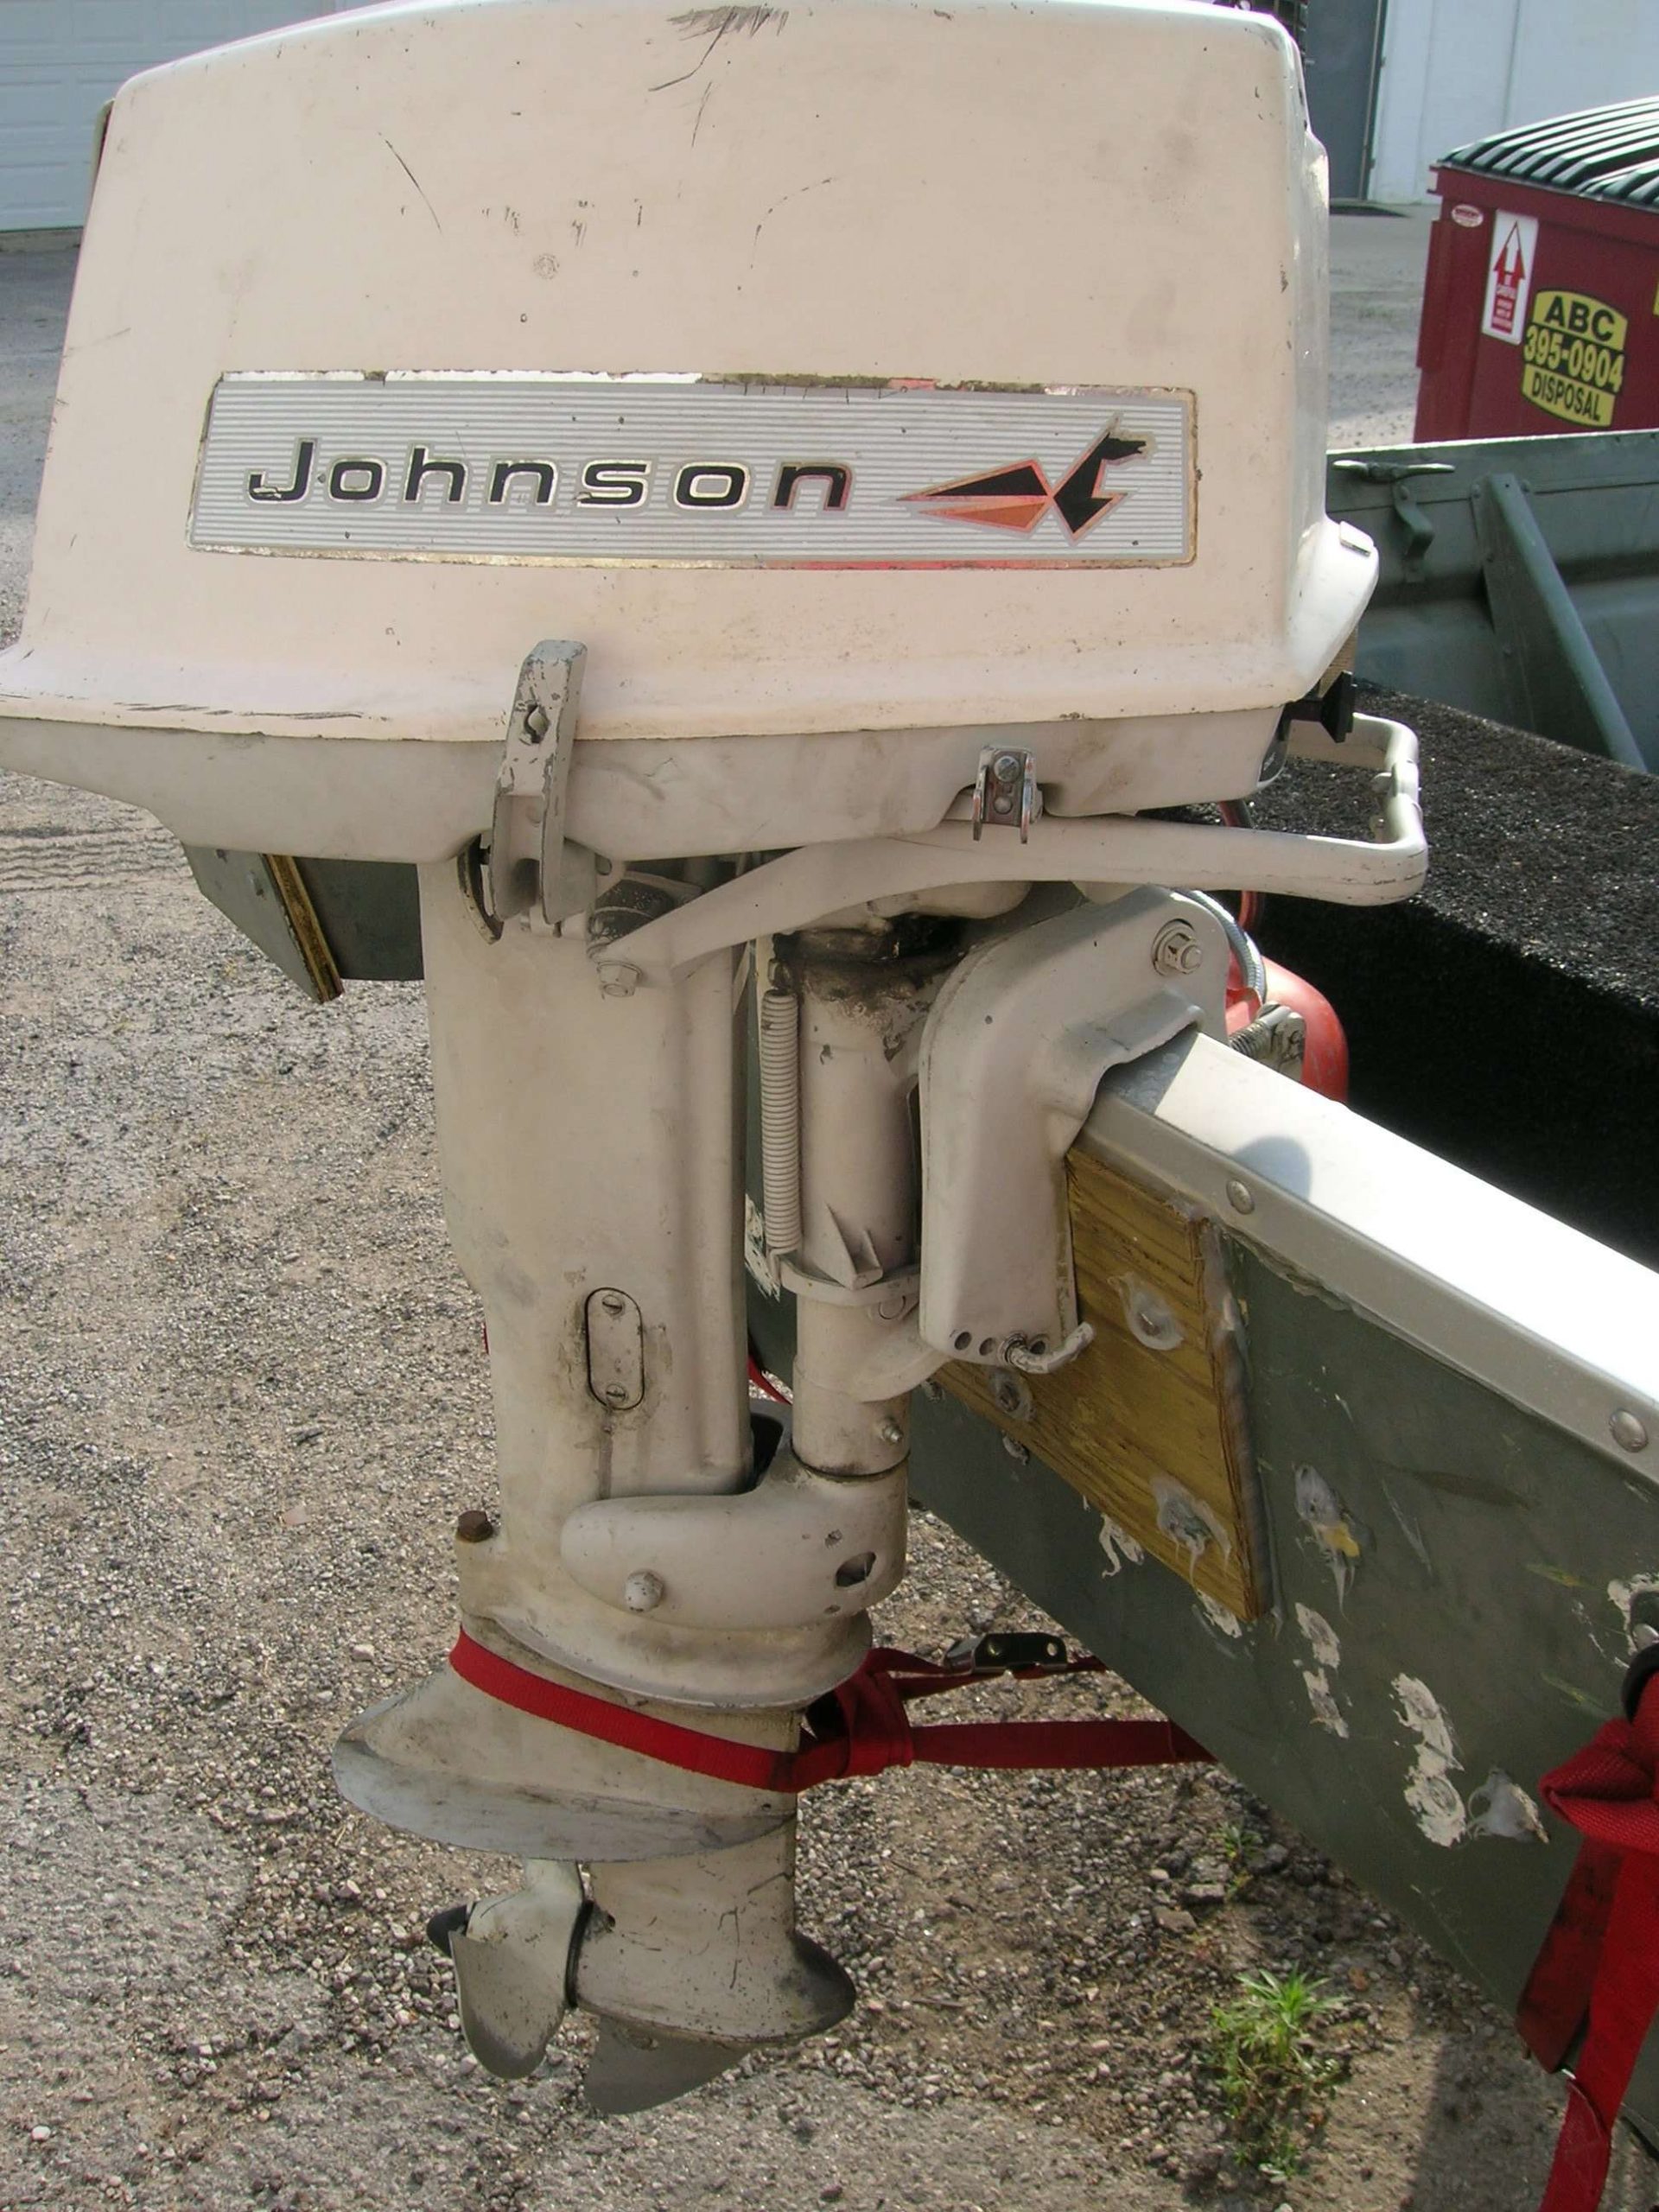 The Johnson 25 hp outboard needed some attention. New carbs, a few new seals, plugs and wires and she ran hard. I spent about $400 on getting it back to operating condition. 